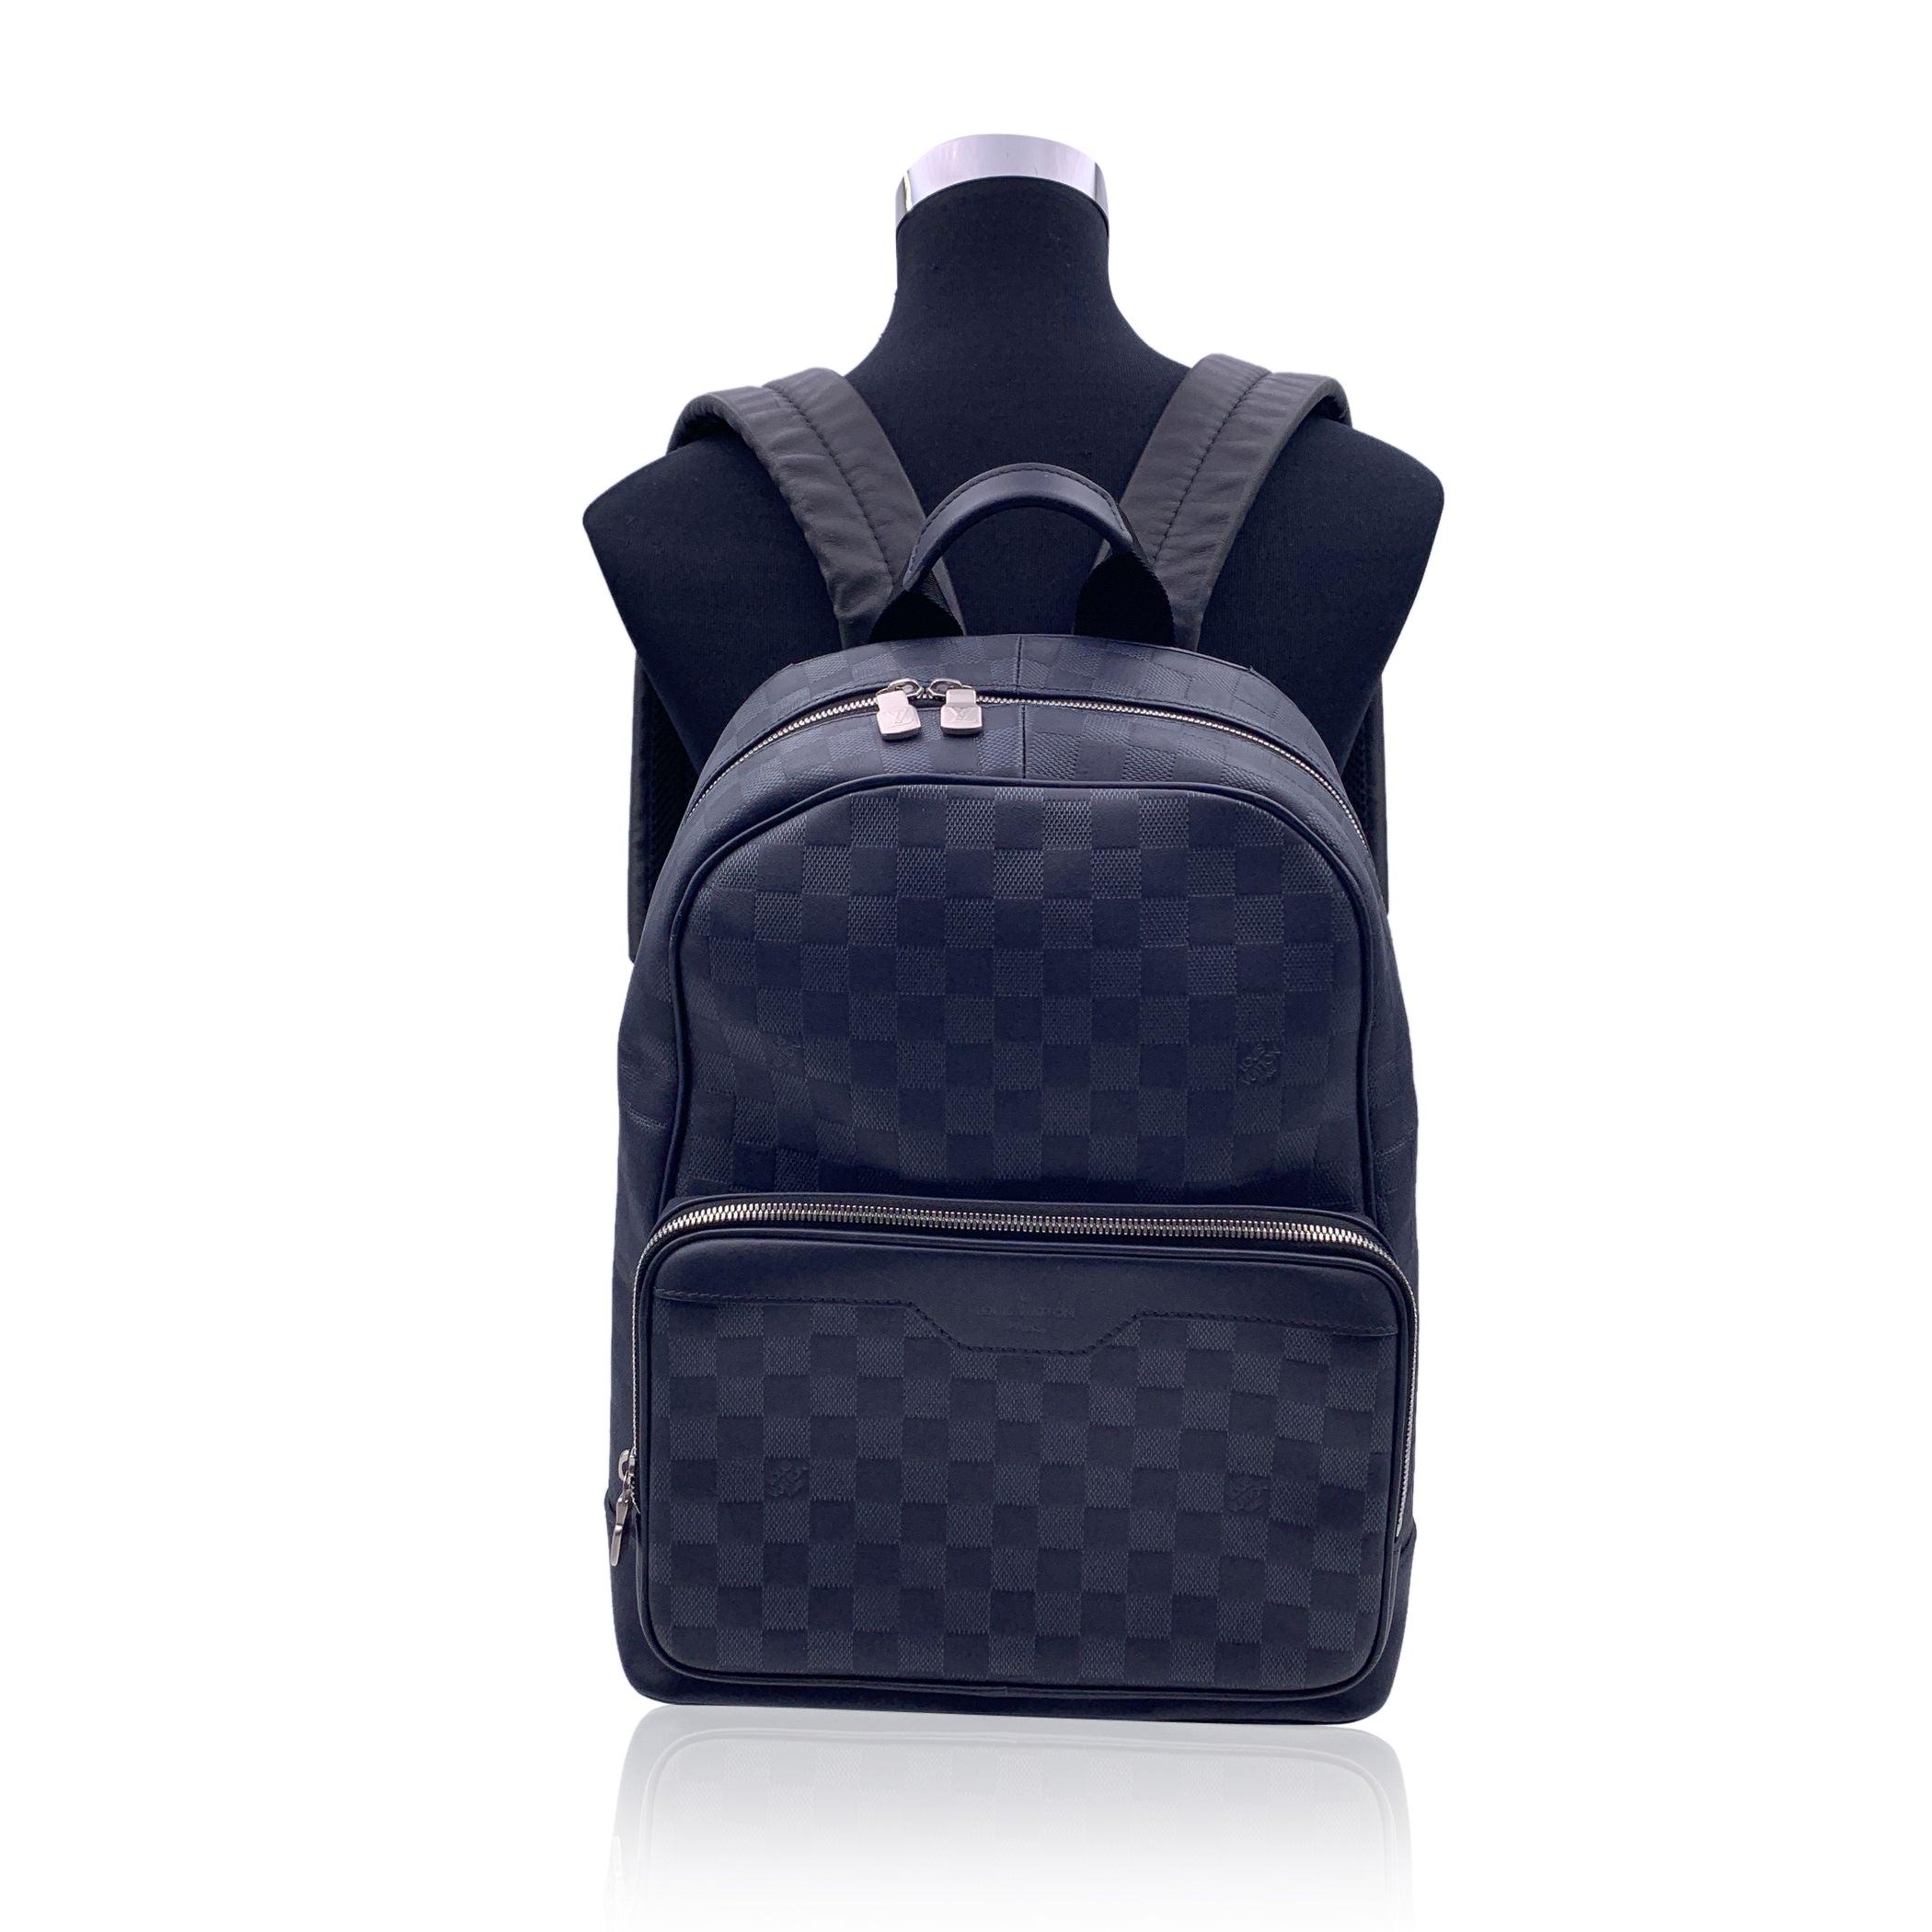 This beautiful Bag will come with a Certificate of Authenticity provided by Entrupy. The certificate will be provided at no further cost Louis Vuitton Navy blue Astral Damier Infini Backpack bag, casual and sophisticated at the same time. Damier